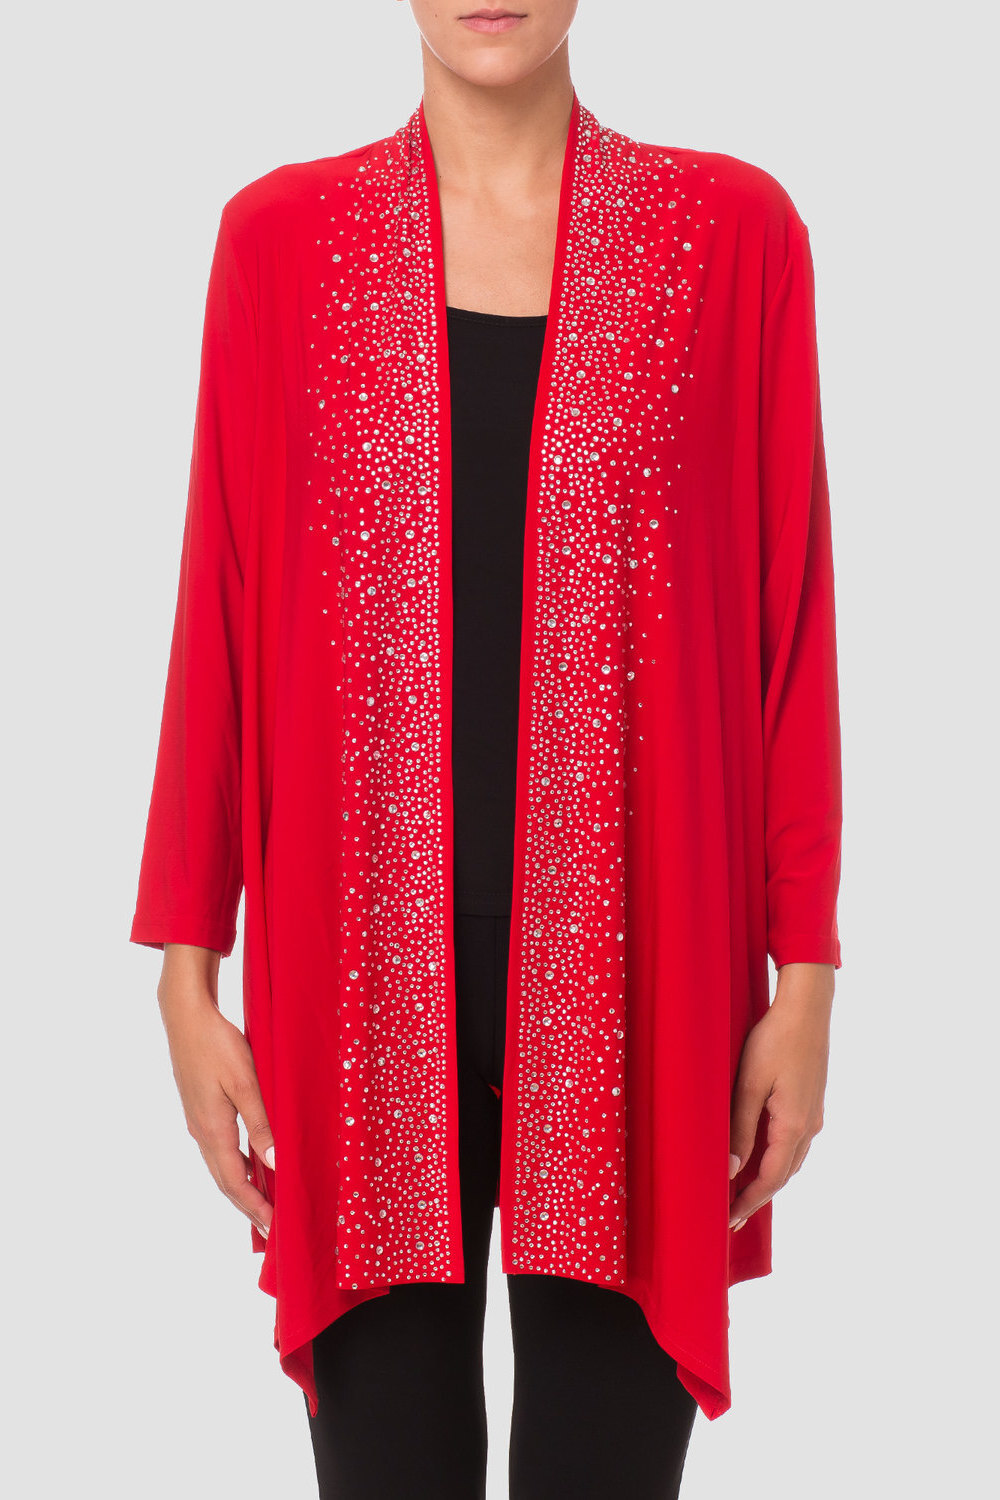 Joseph Ribkoff cover up style 173131. Rouge A Levres 173